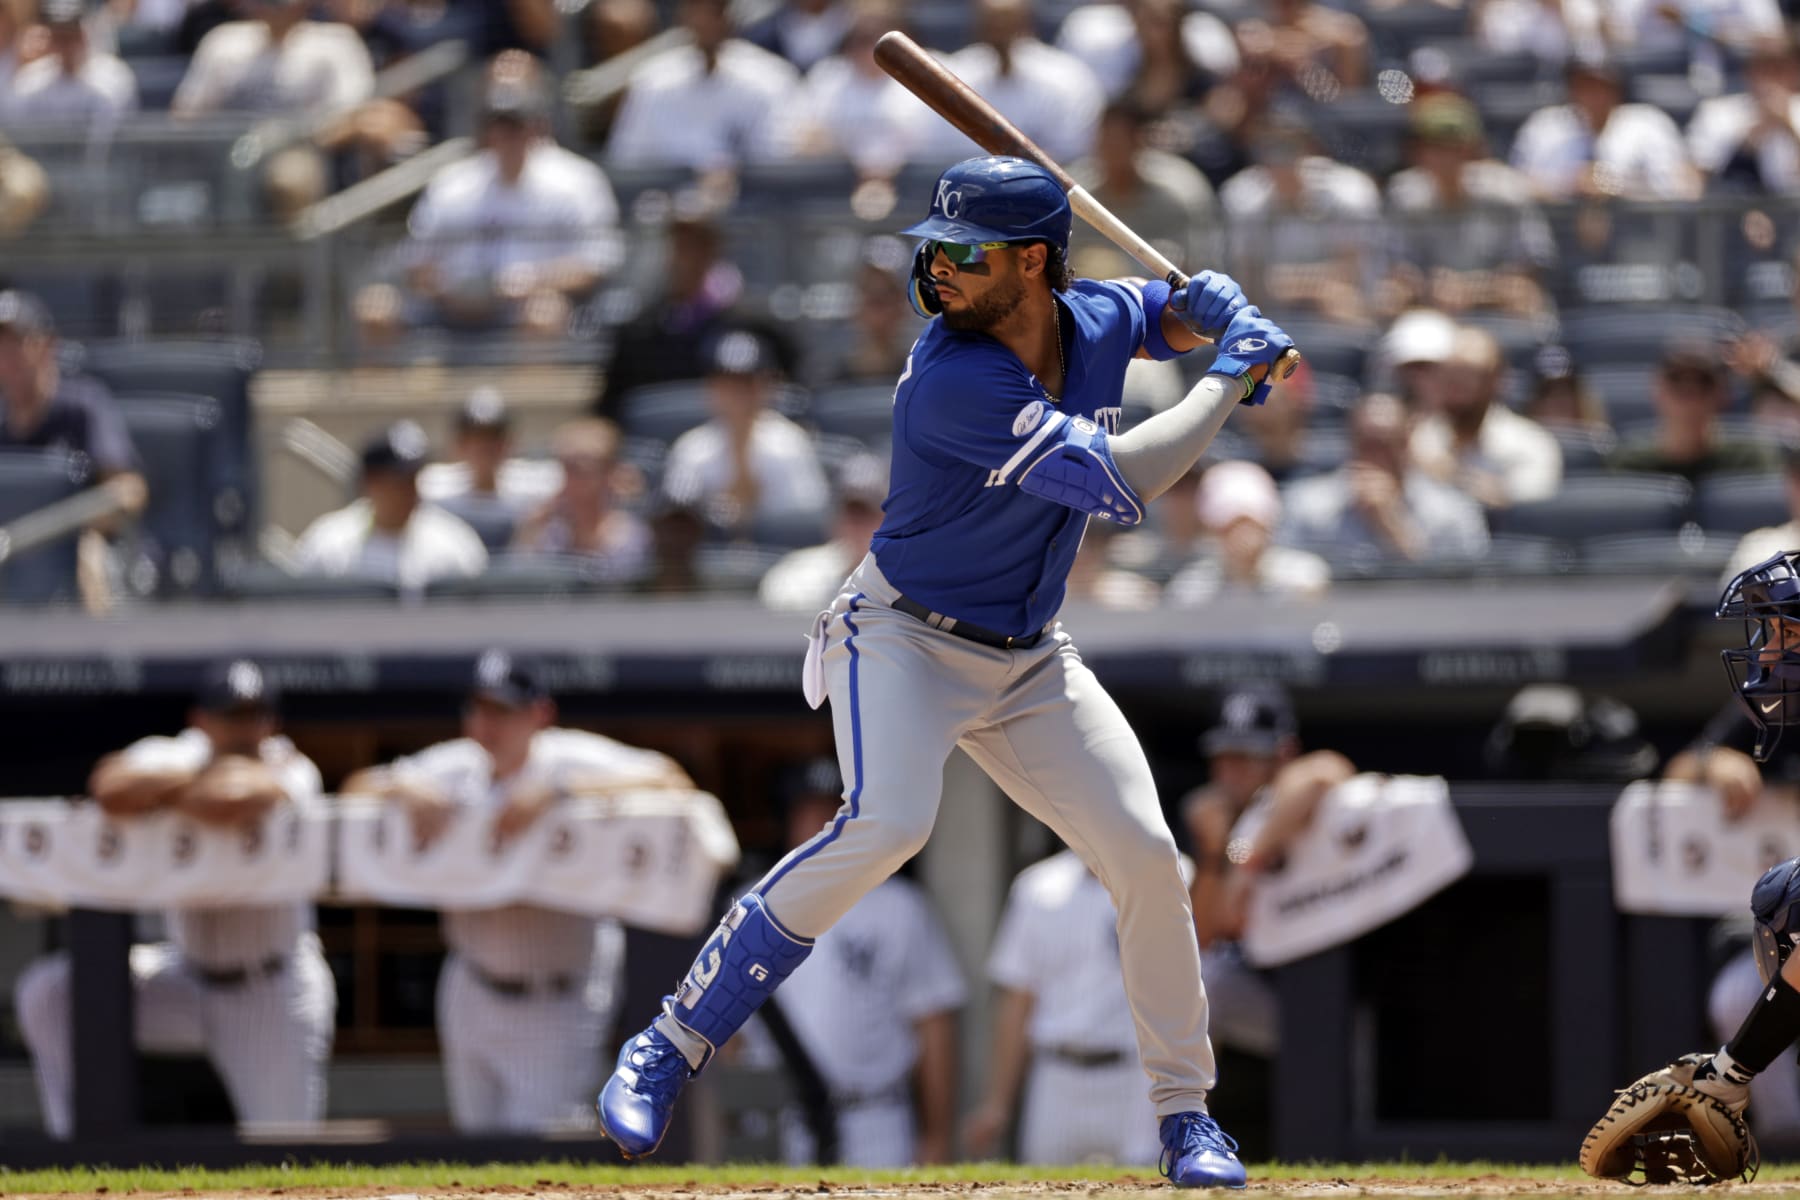 Whit Merrifield and Alek Manoah lead the Blue Jays to a 12-2